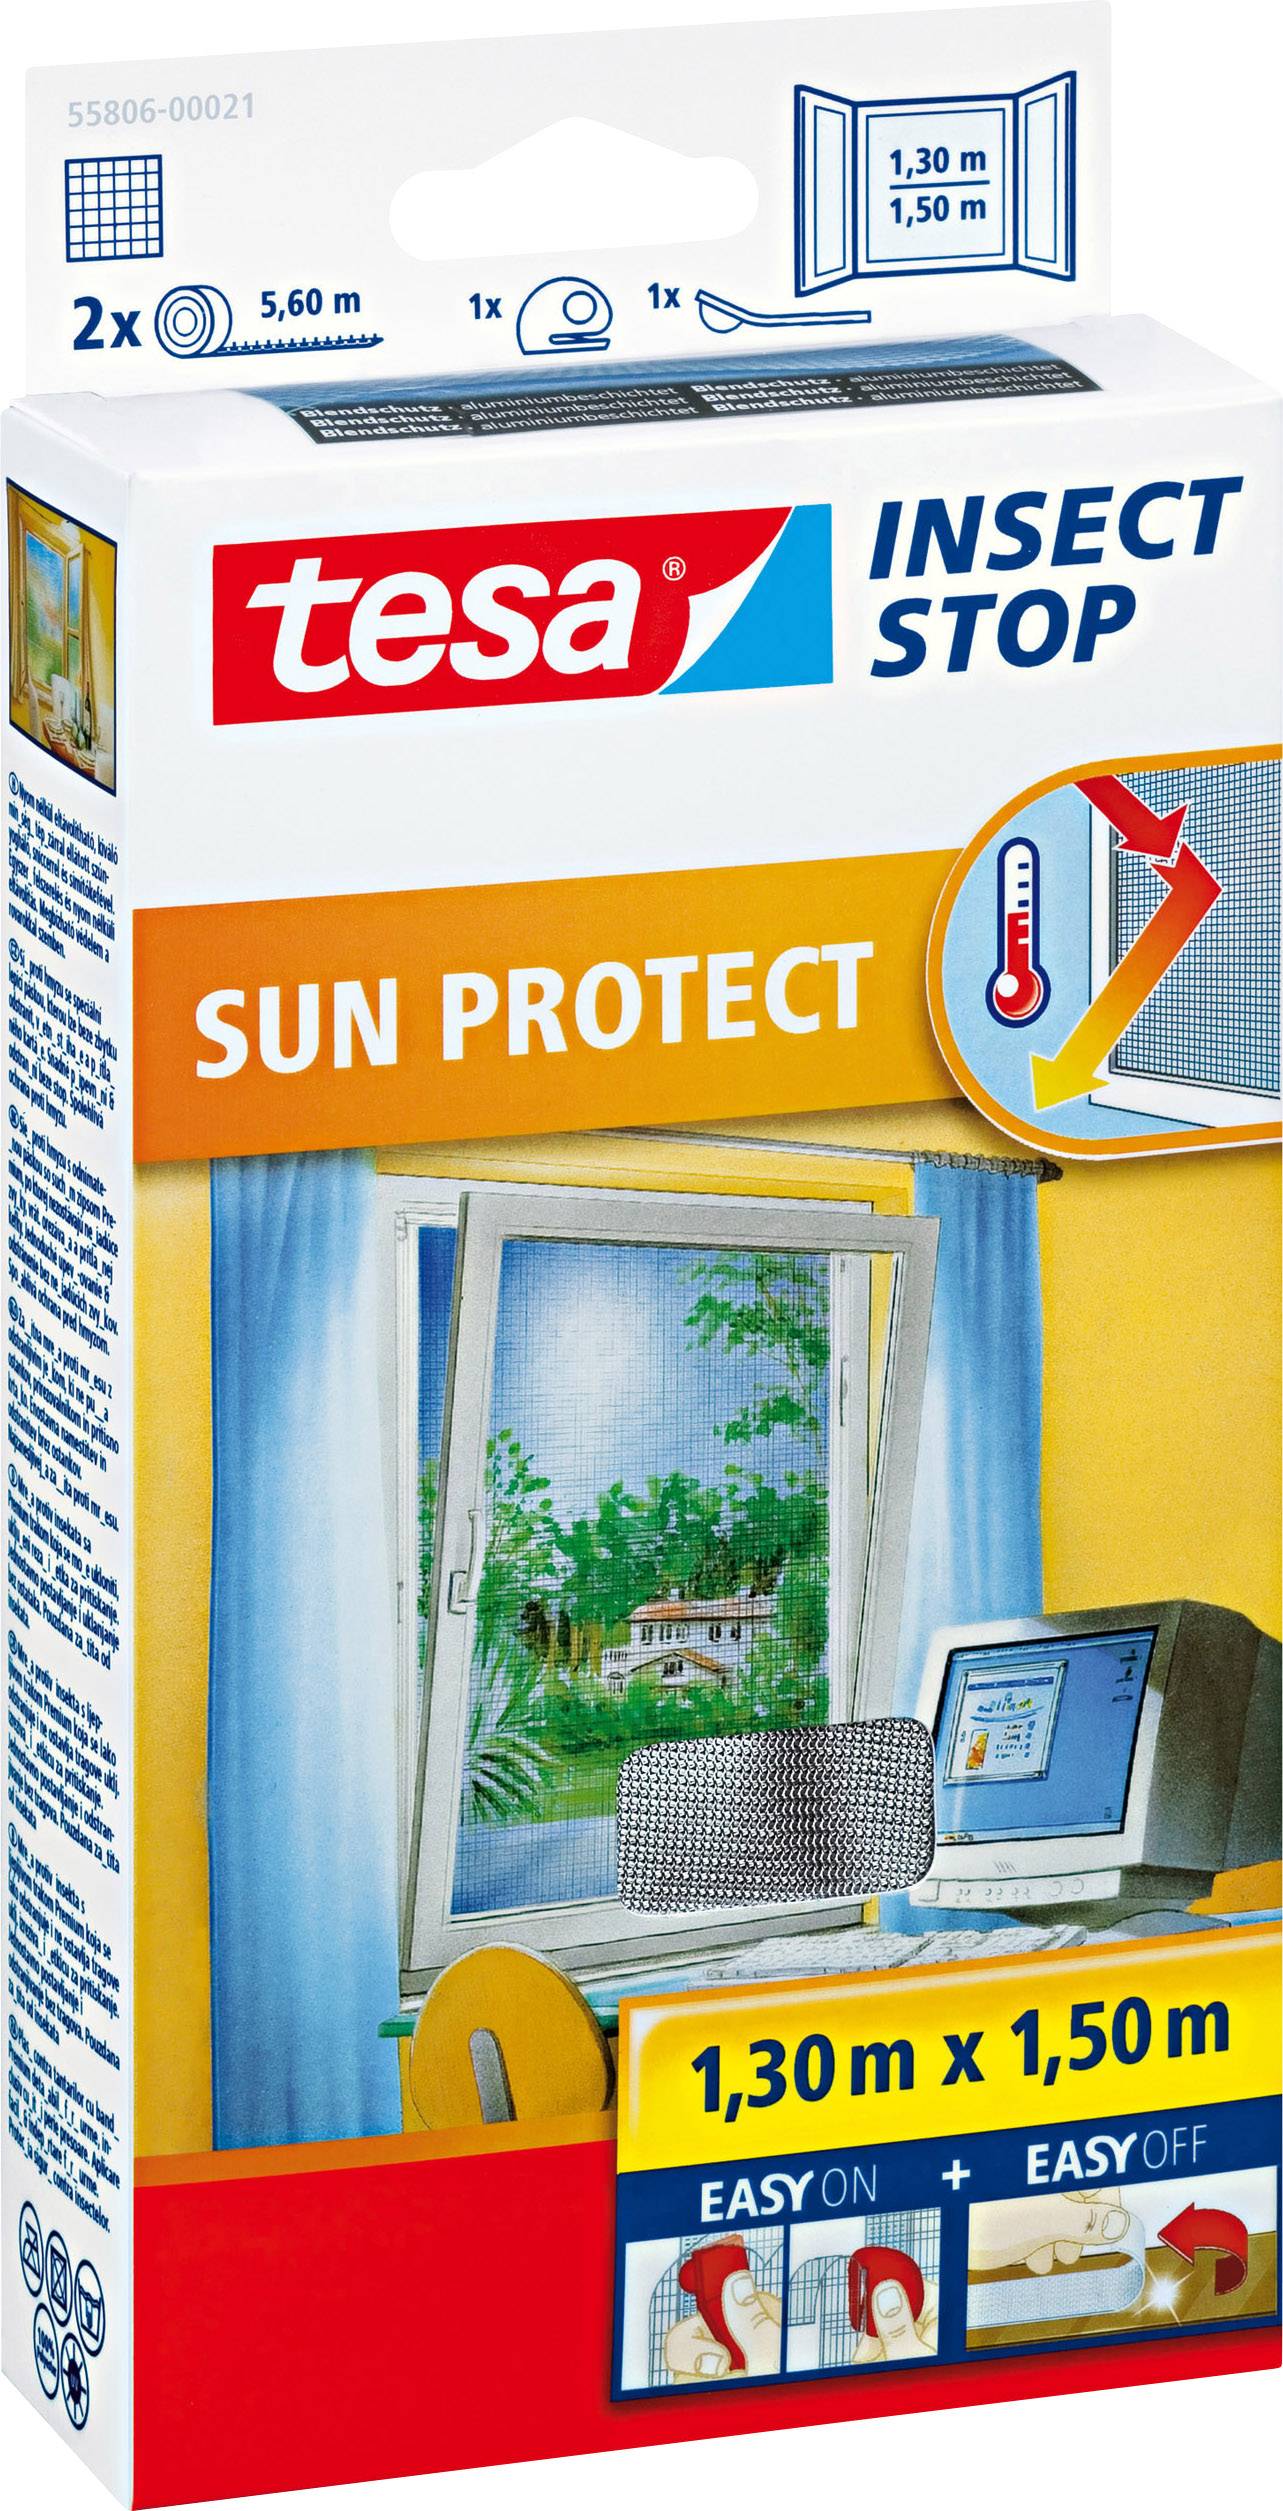 Tesa Insect Stop Comfort Fly Screen Tape Loop For Windows Removable 